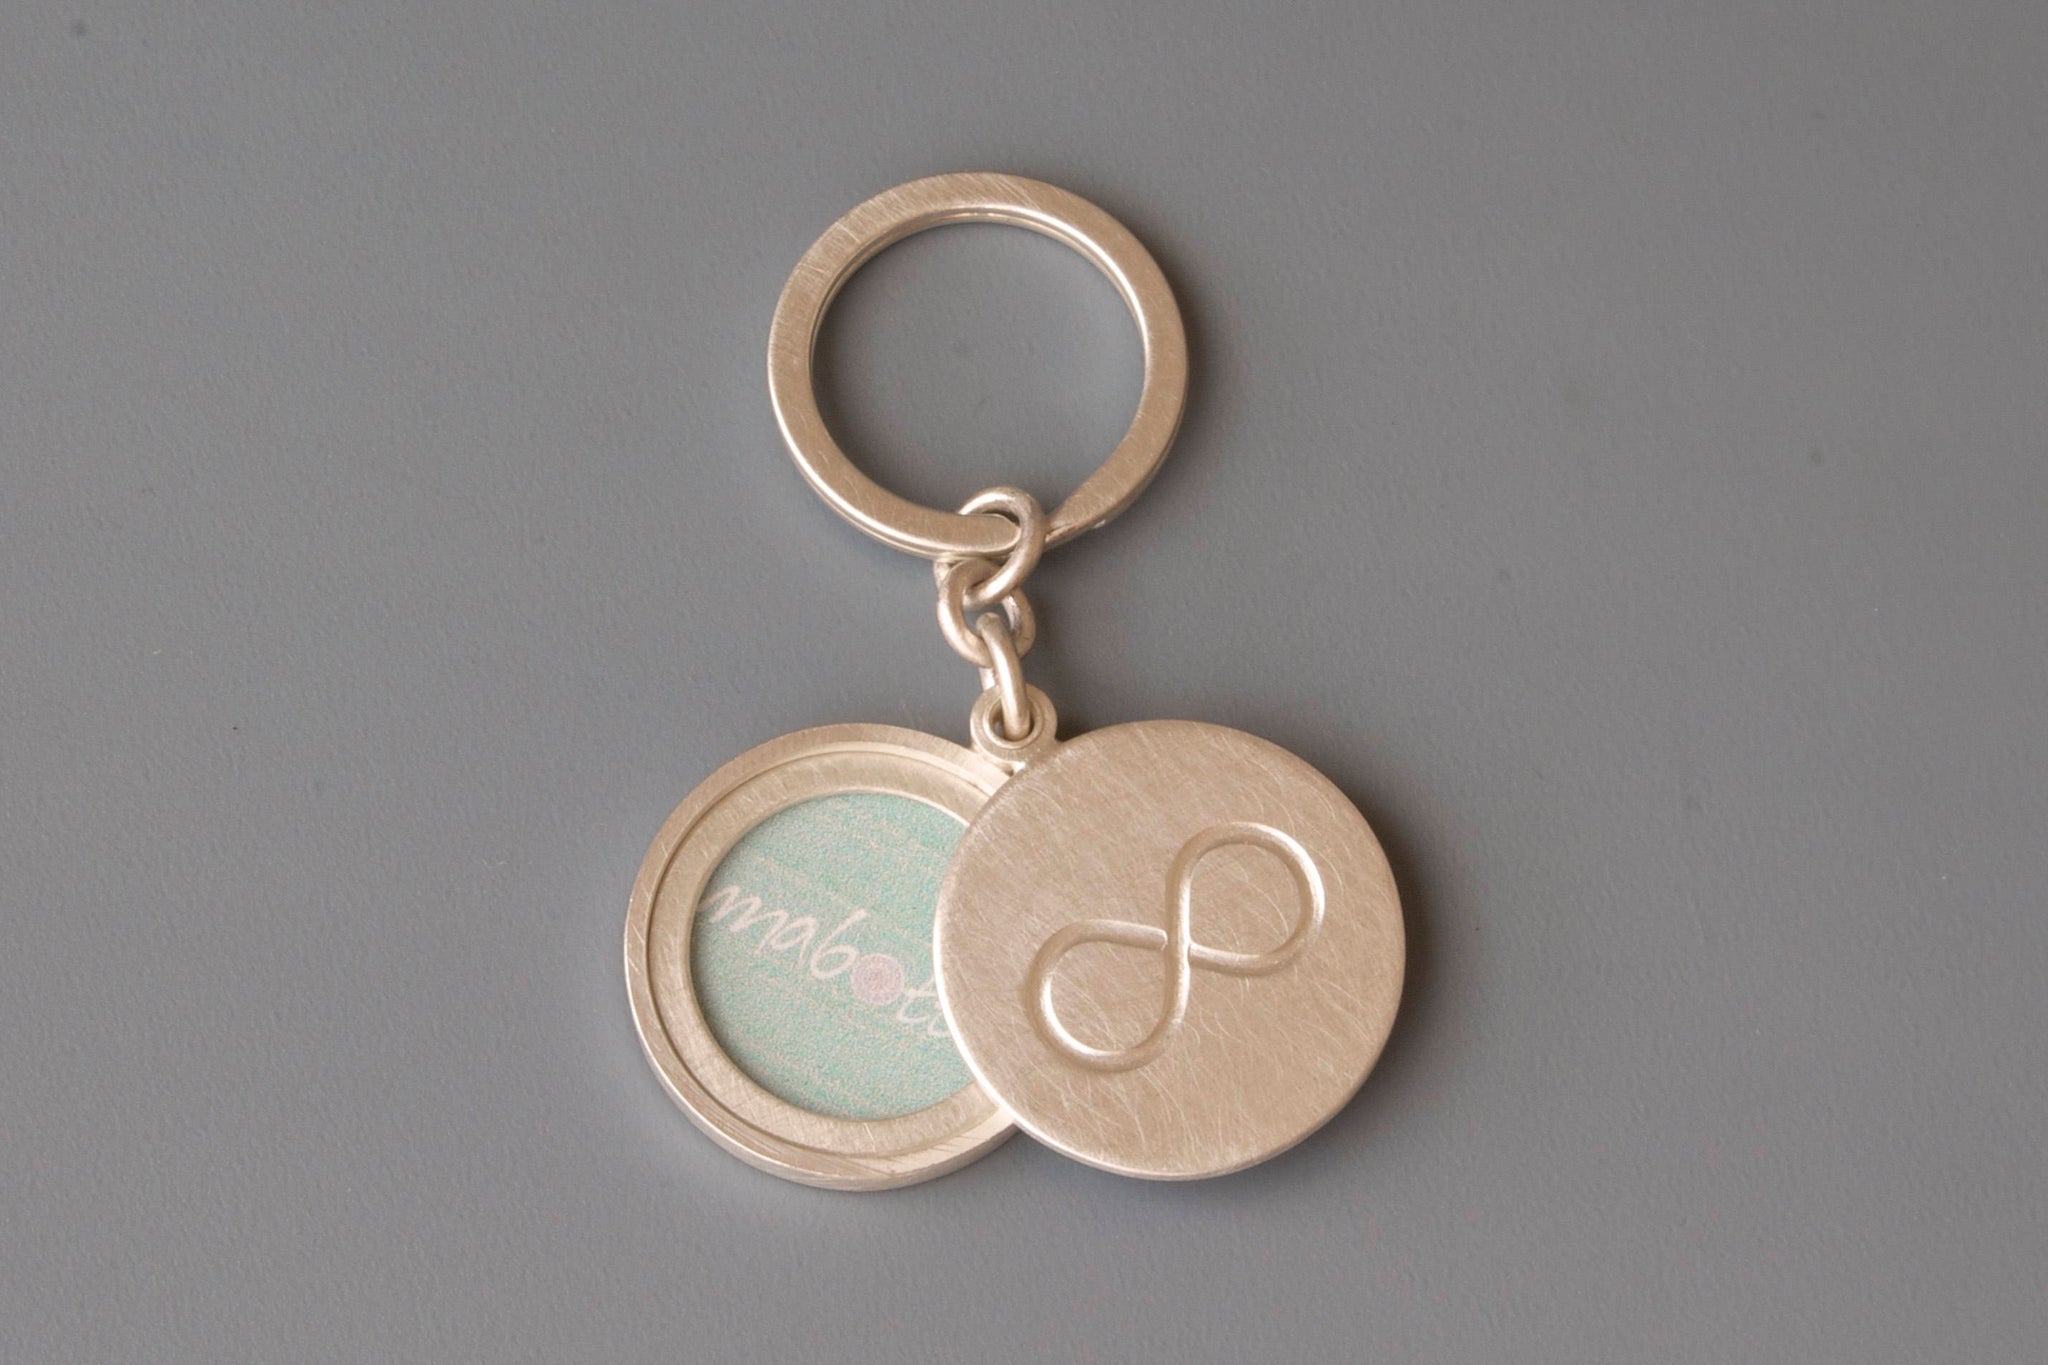 solid sterling silver keychain locket with infinity sign for one photo